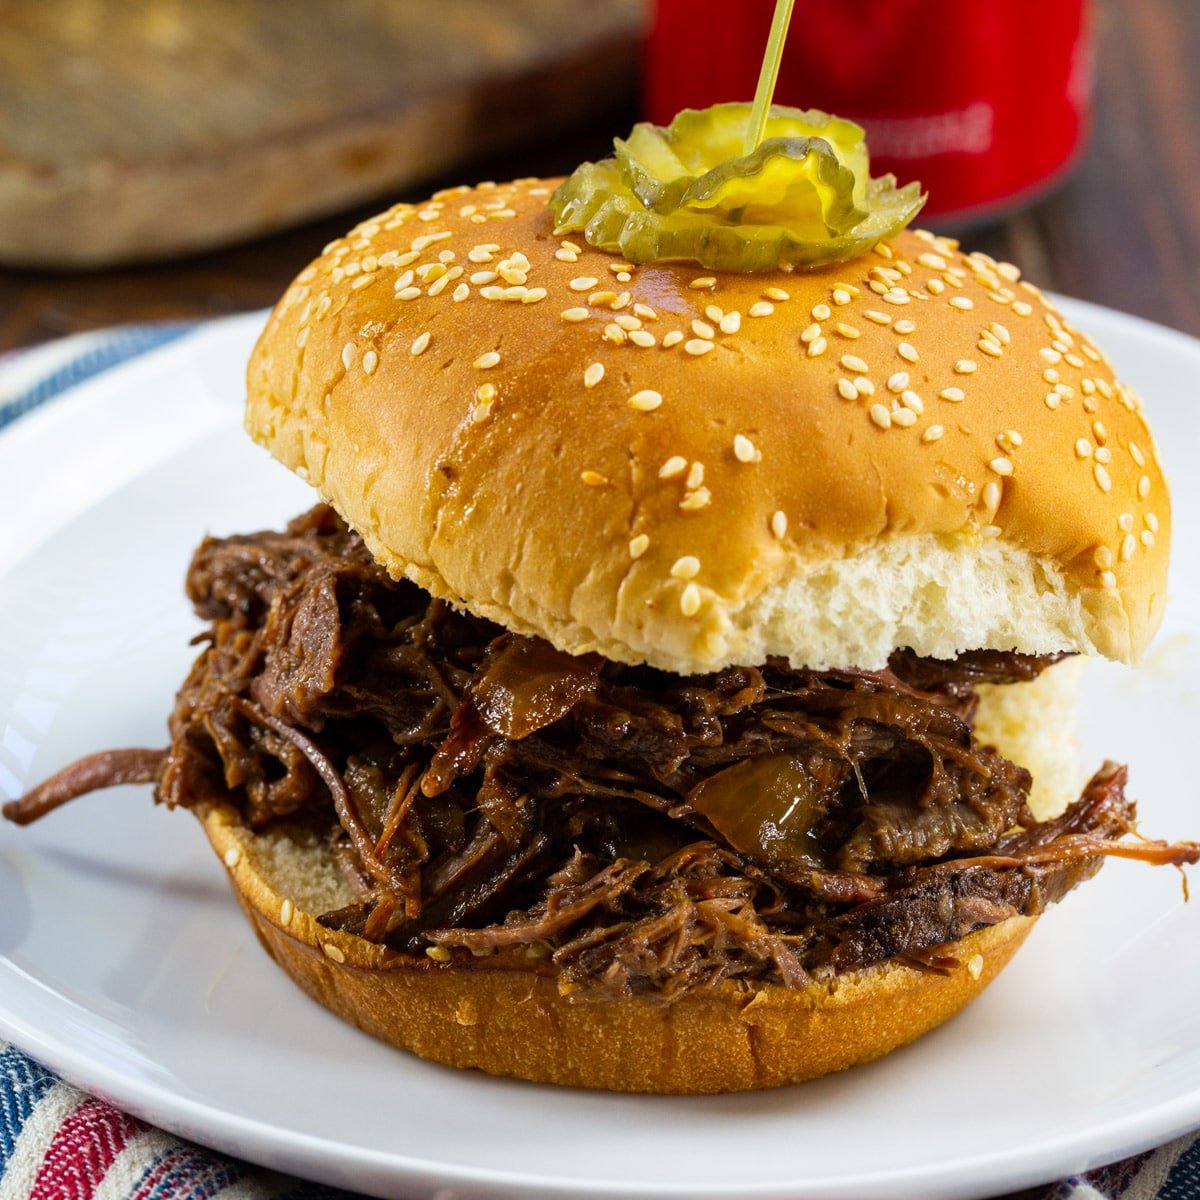 Slow Cooker BBQ Beef on a bun.